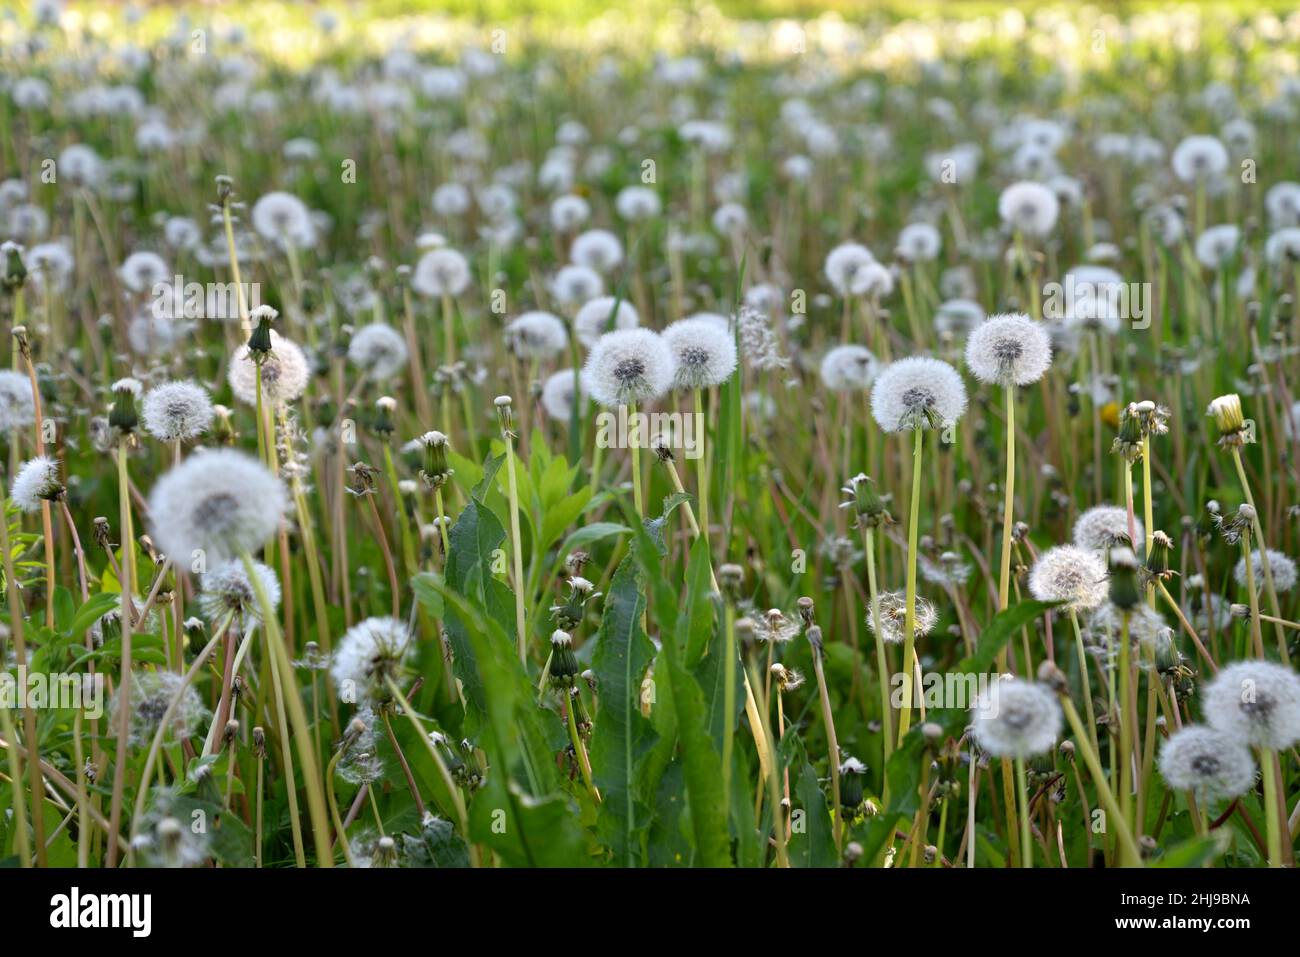 Green grass background with white dandelions Stock Photo